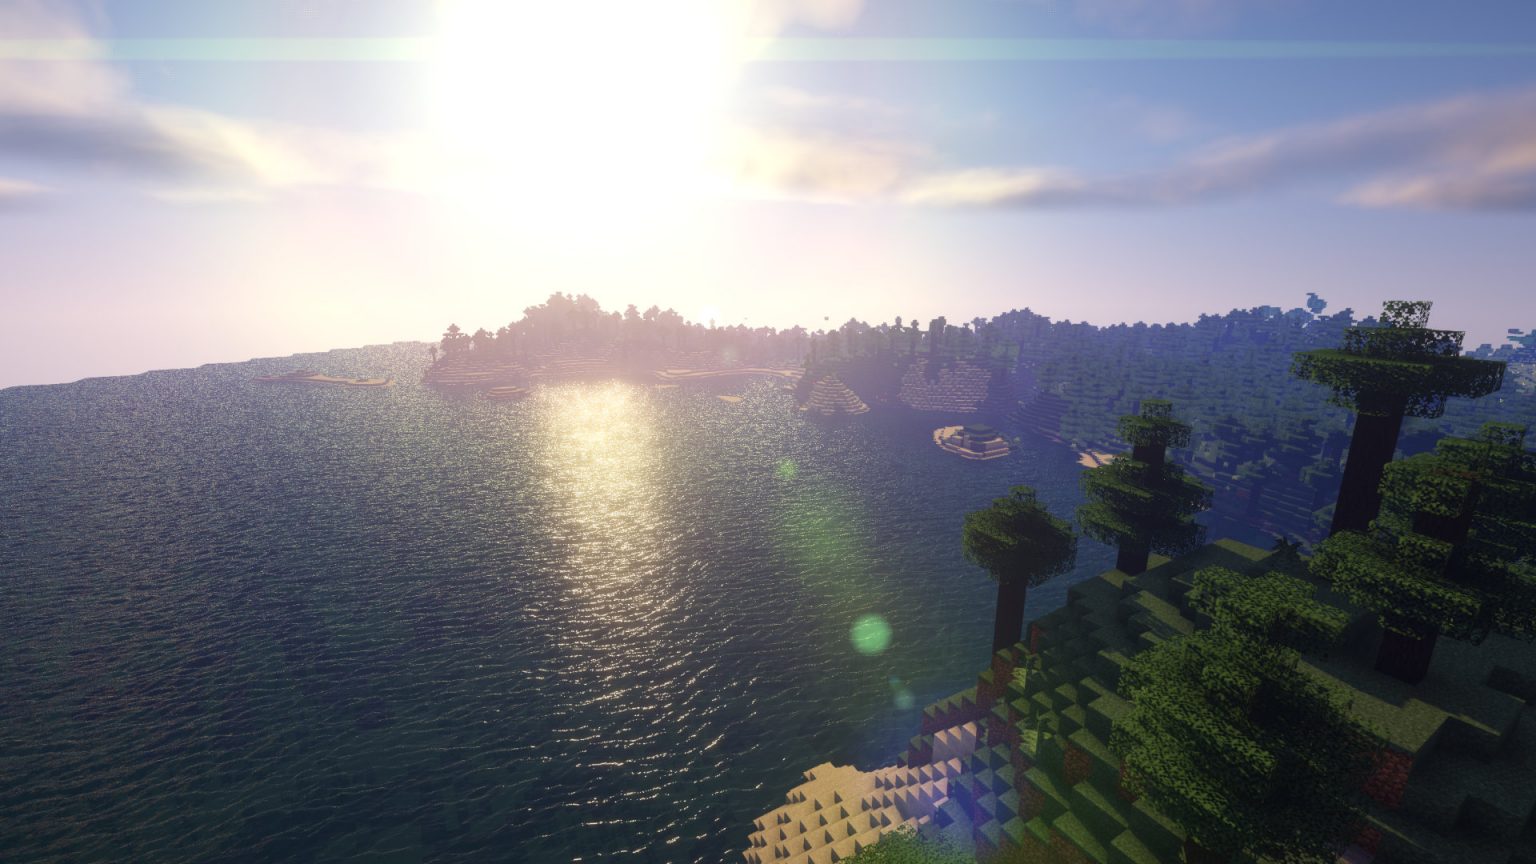 awesome shaders texture pack images